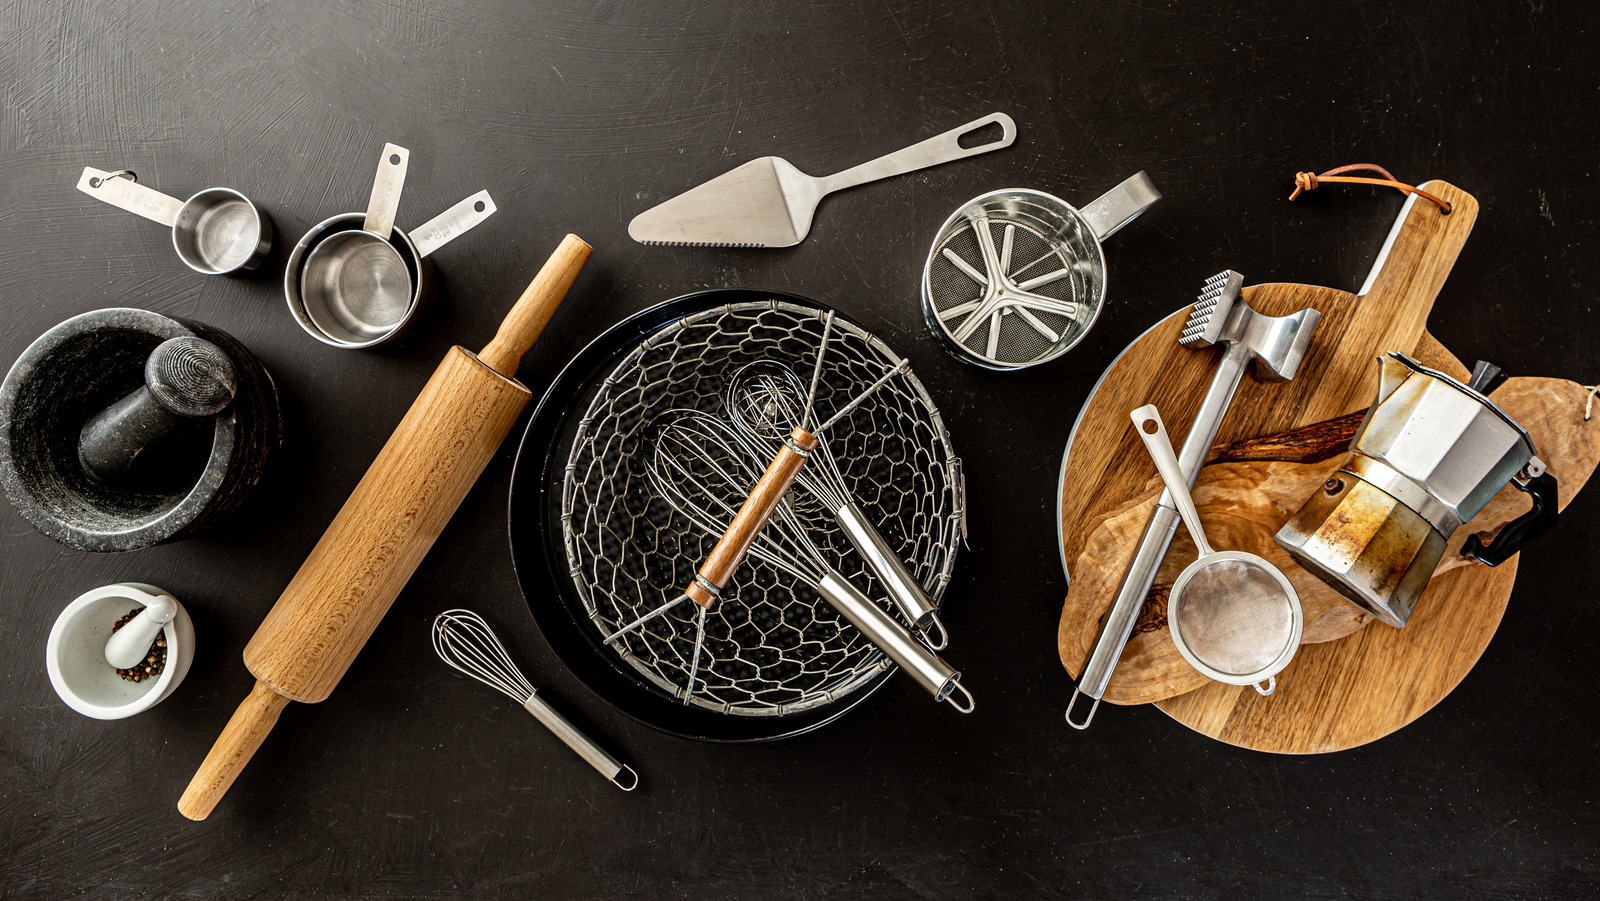 https://www.tastingtable.com/img/gallery/14-kitchen-tools-beloved-by-famous-chefs/l-intro-1674059026.jpg